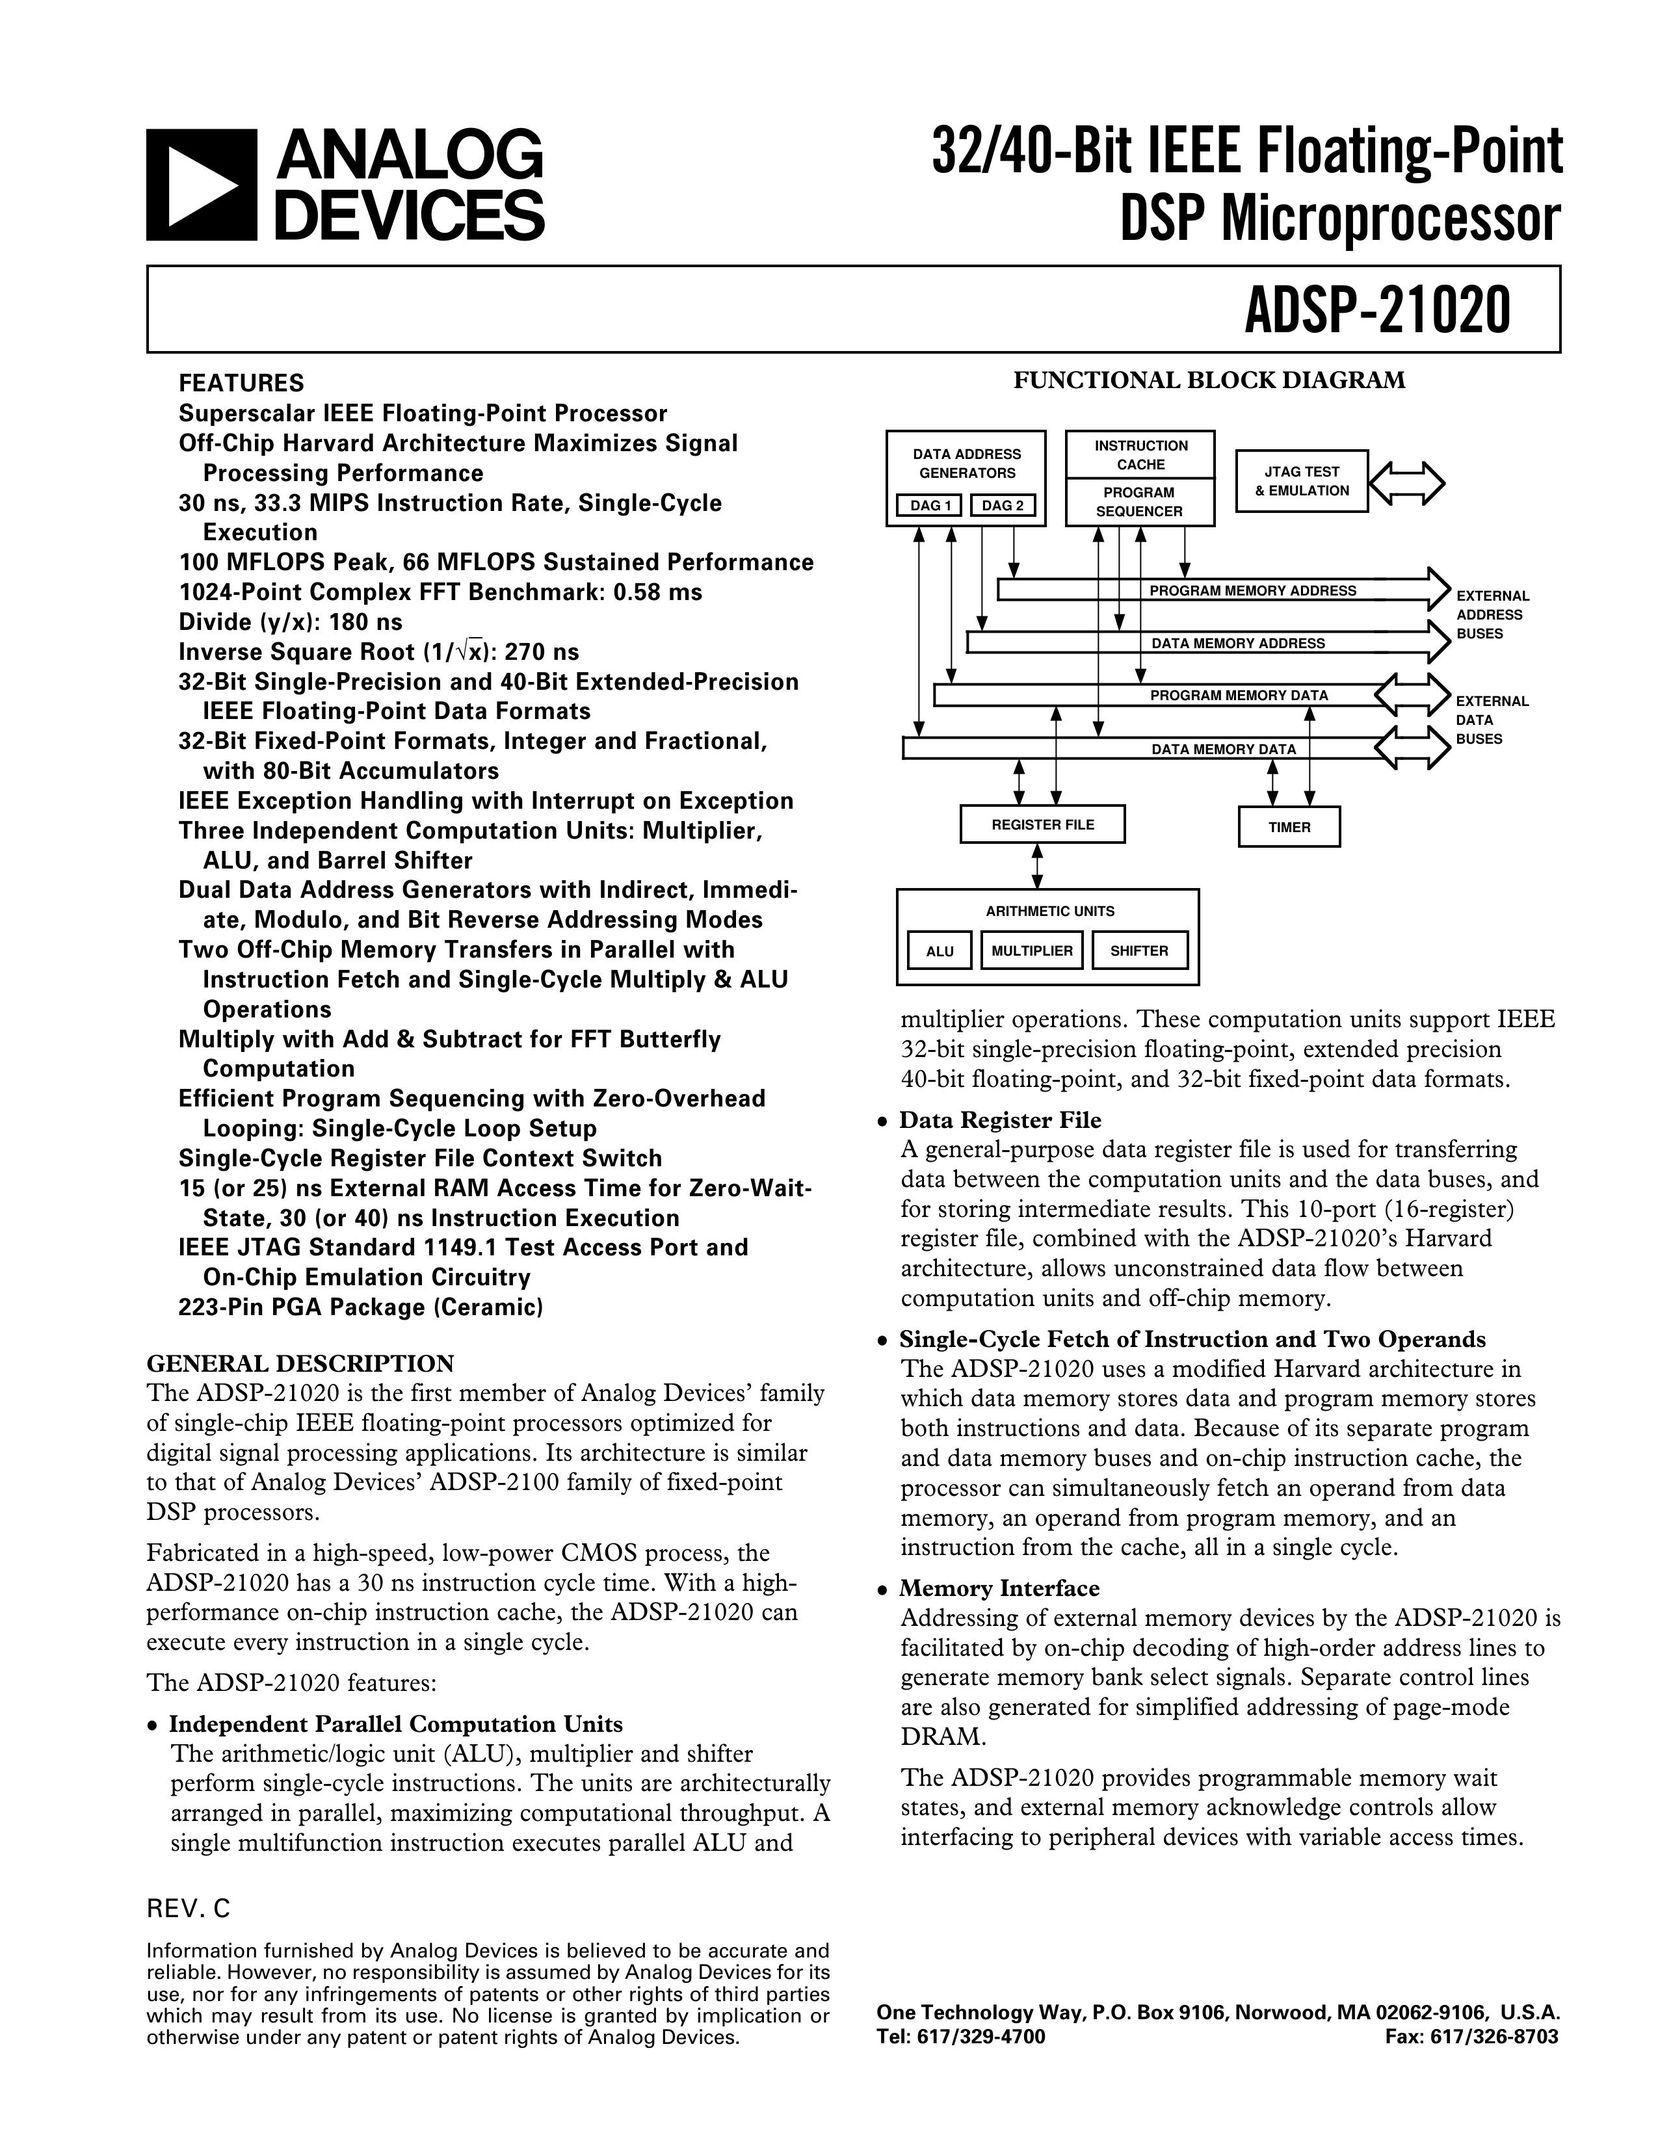 Analog Devices ADSP-21020 Computer Hardware User Manual